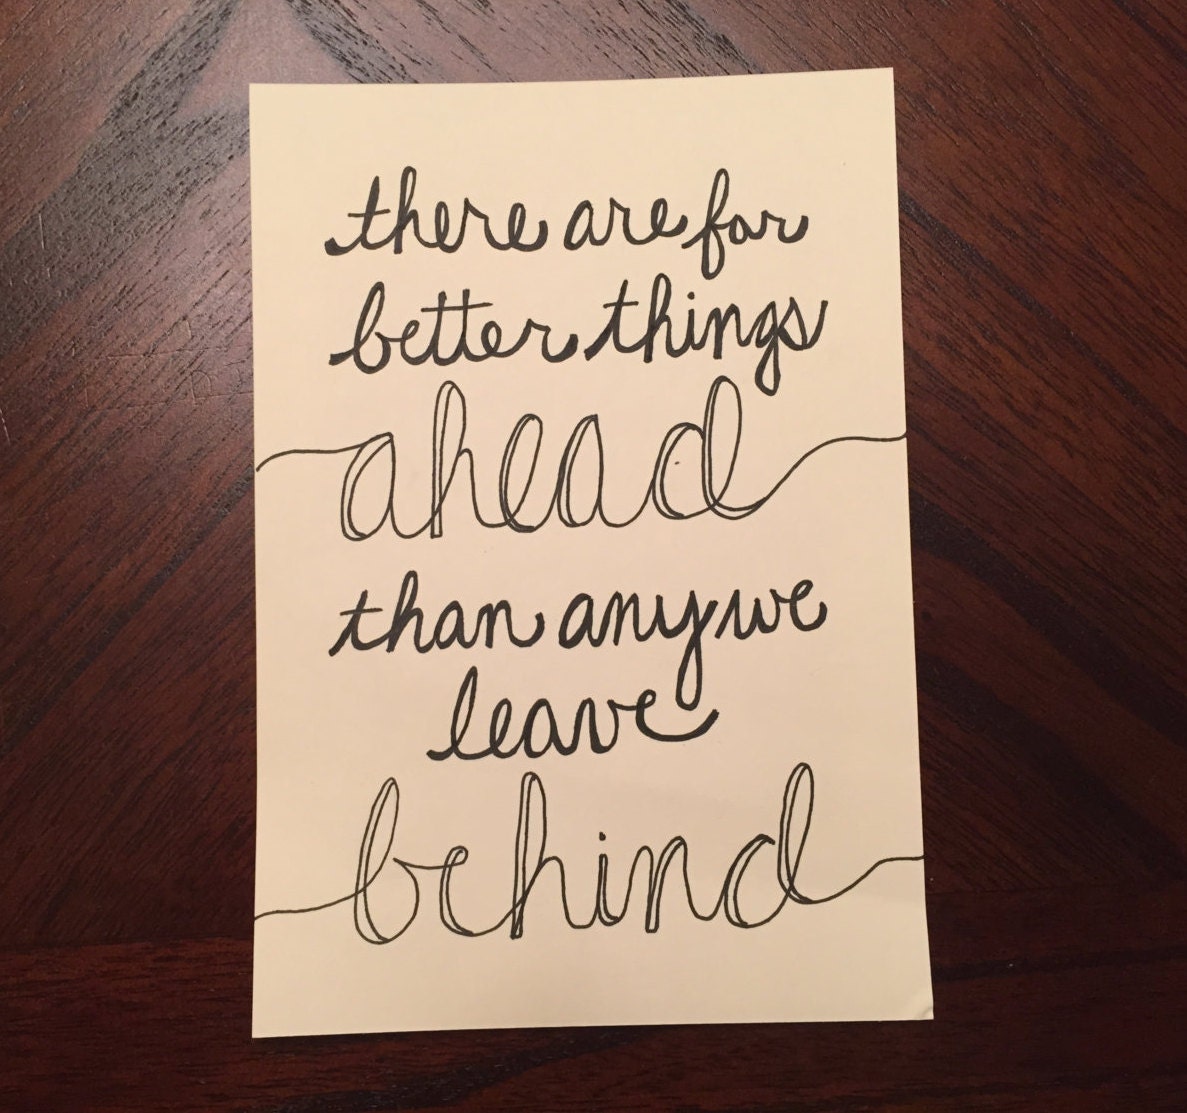 Better Things Ahead by SassyAmpersand on Etsy